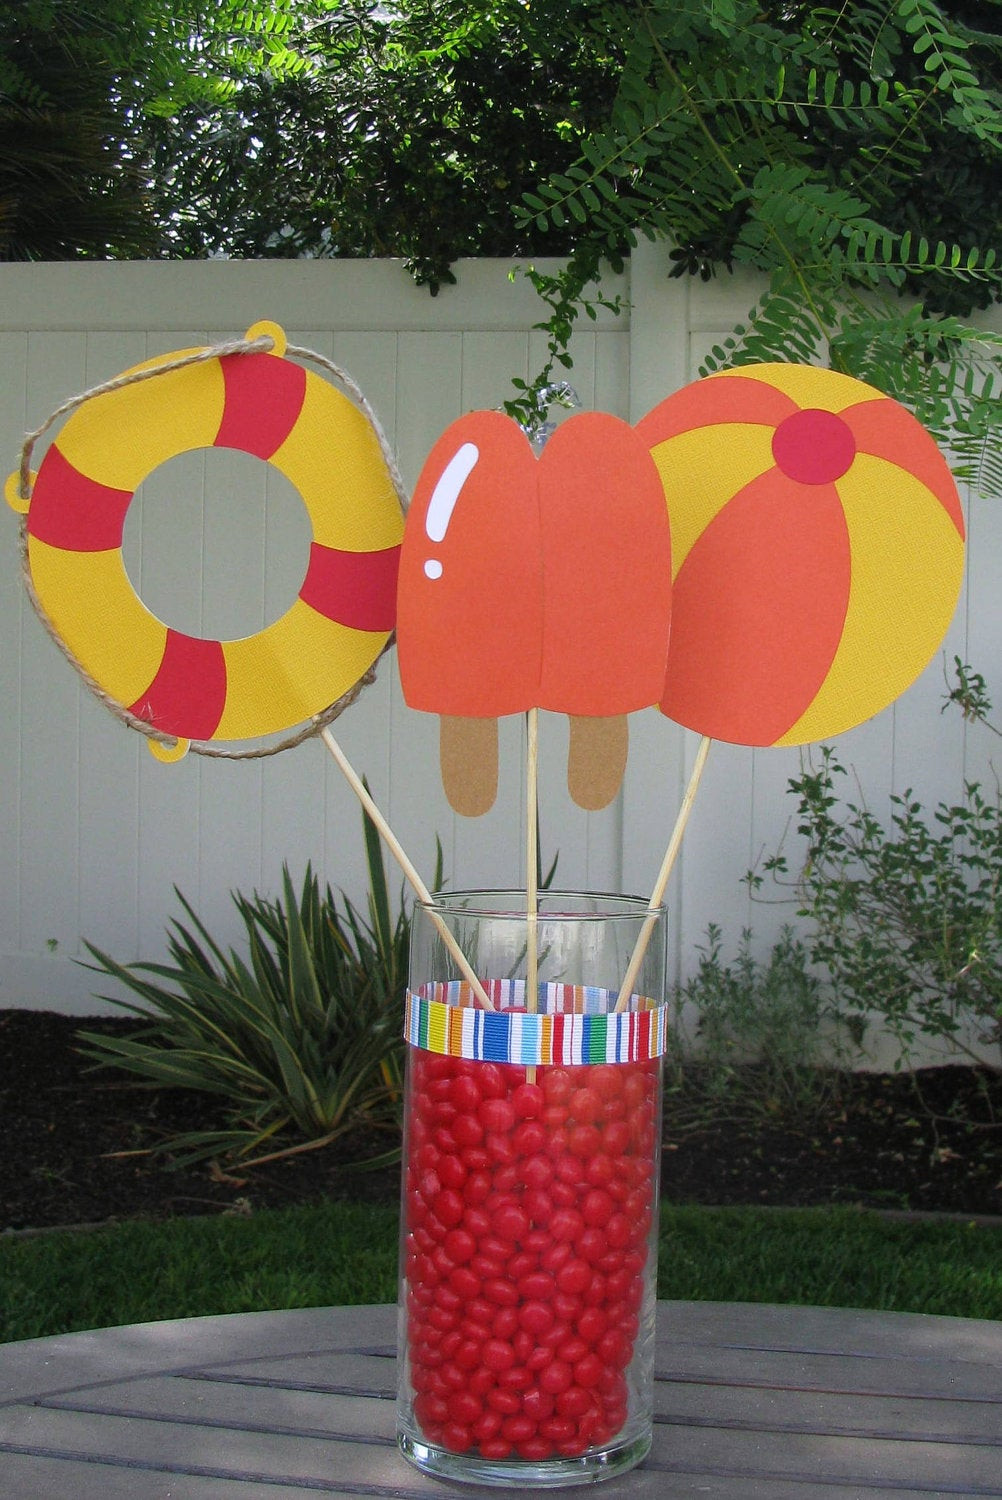 Pool Party Centerpieces Ideas
 Pool Party Table Decorations Set of 3 MADE TO ORDER